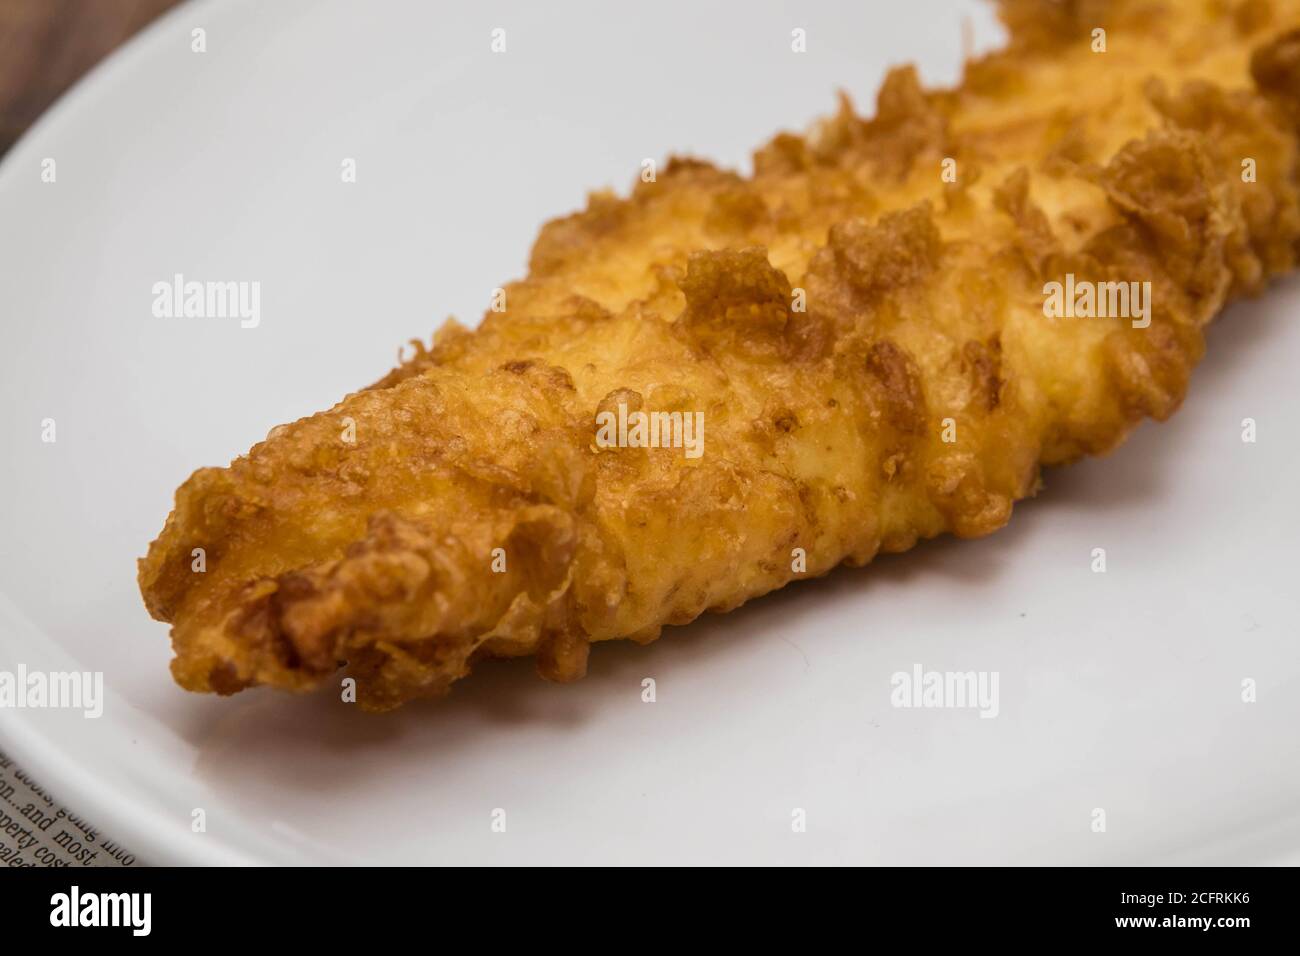 Battered fish - traditional British deep fried cod Stock Photo